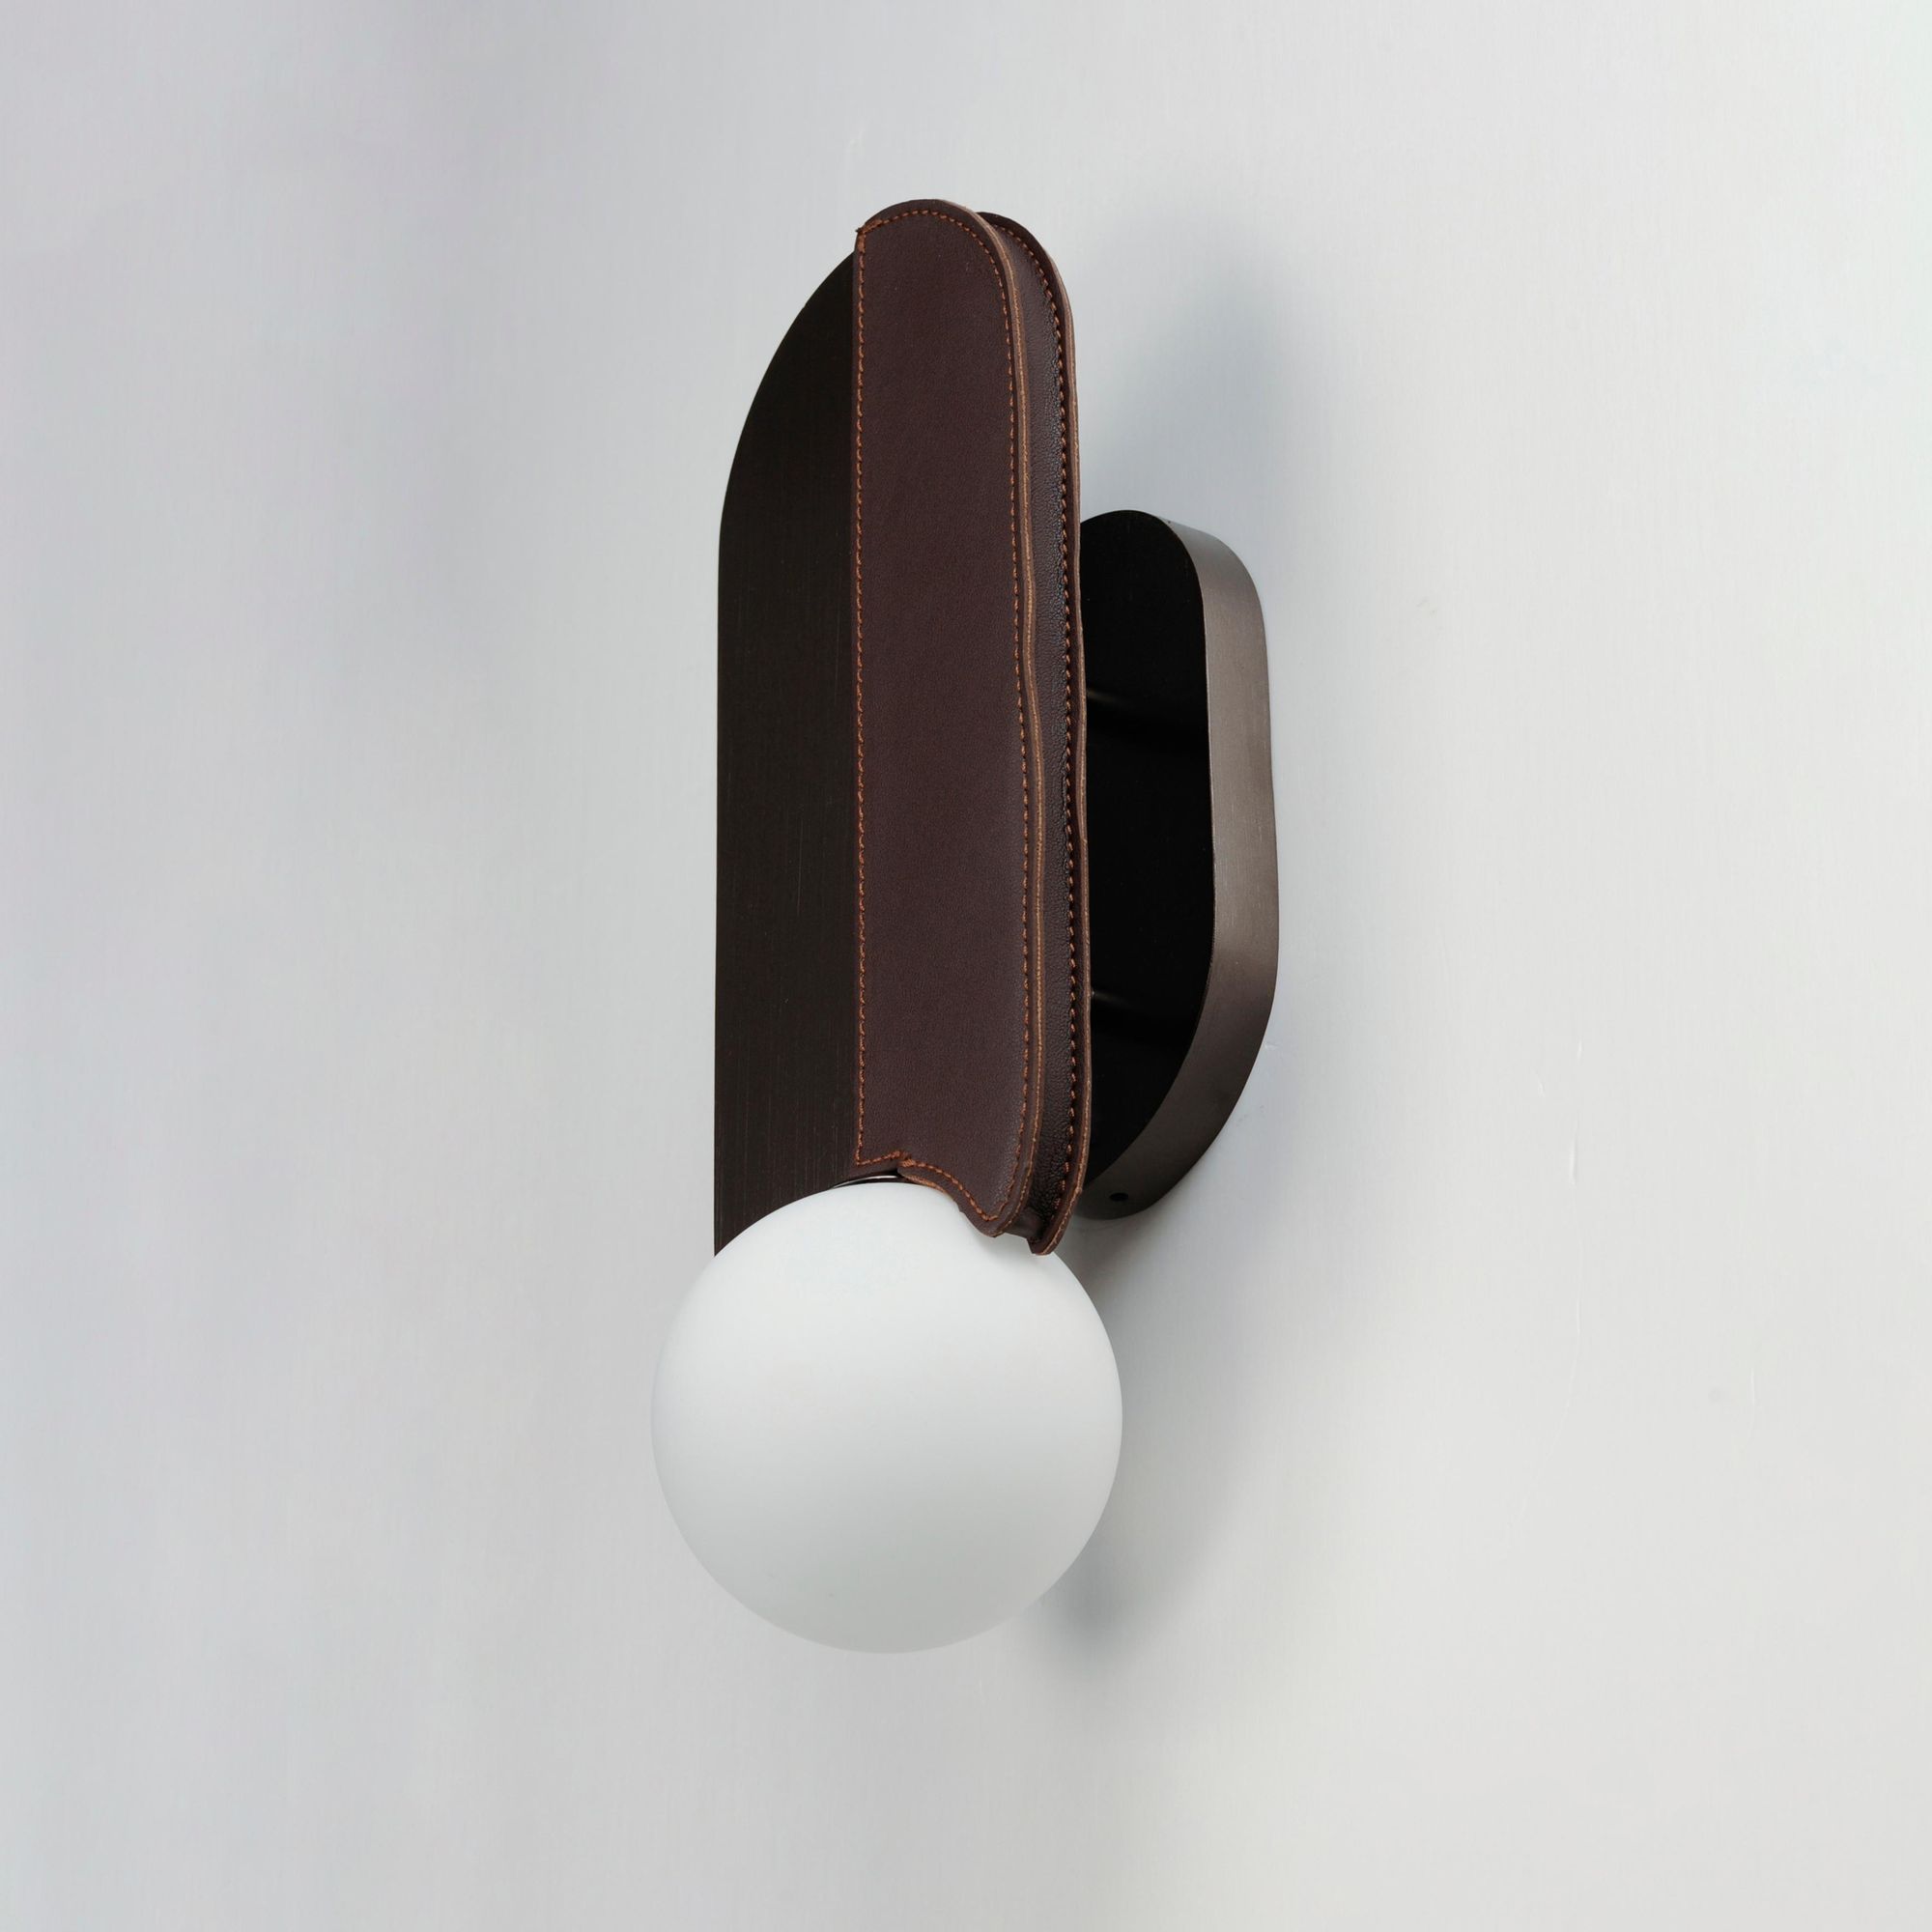 Studio M SM24601BBZ Stitched Down-Light Wall Sconce in Brushed Bronze by Nina Magon